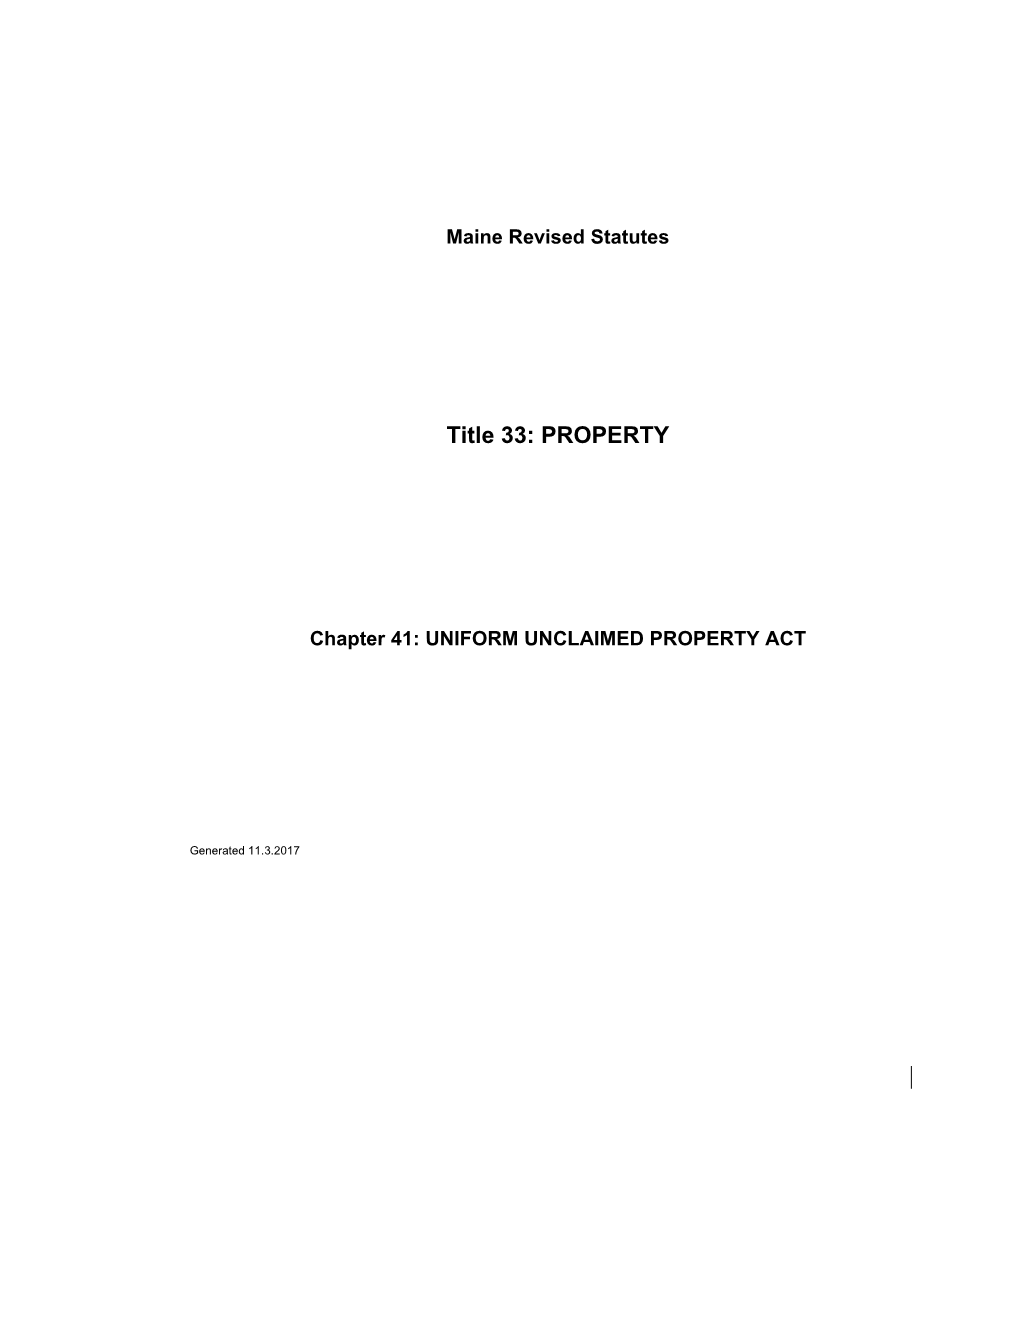 Chapter41: UNIFORM UNCLAIMED PROPERTY ACT